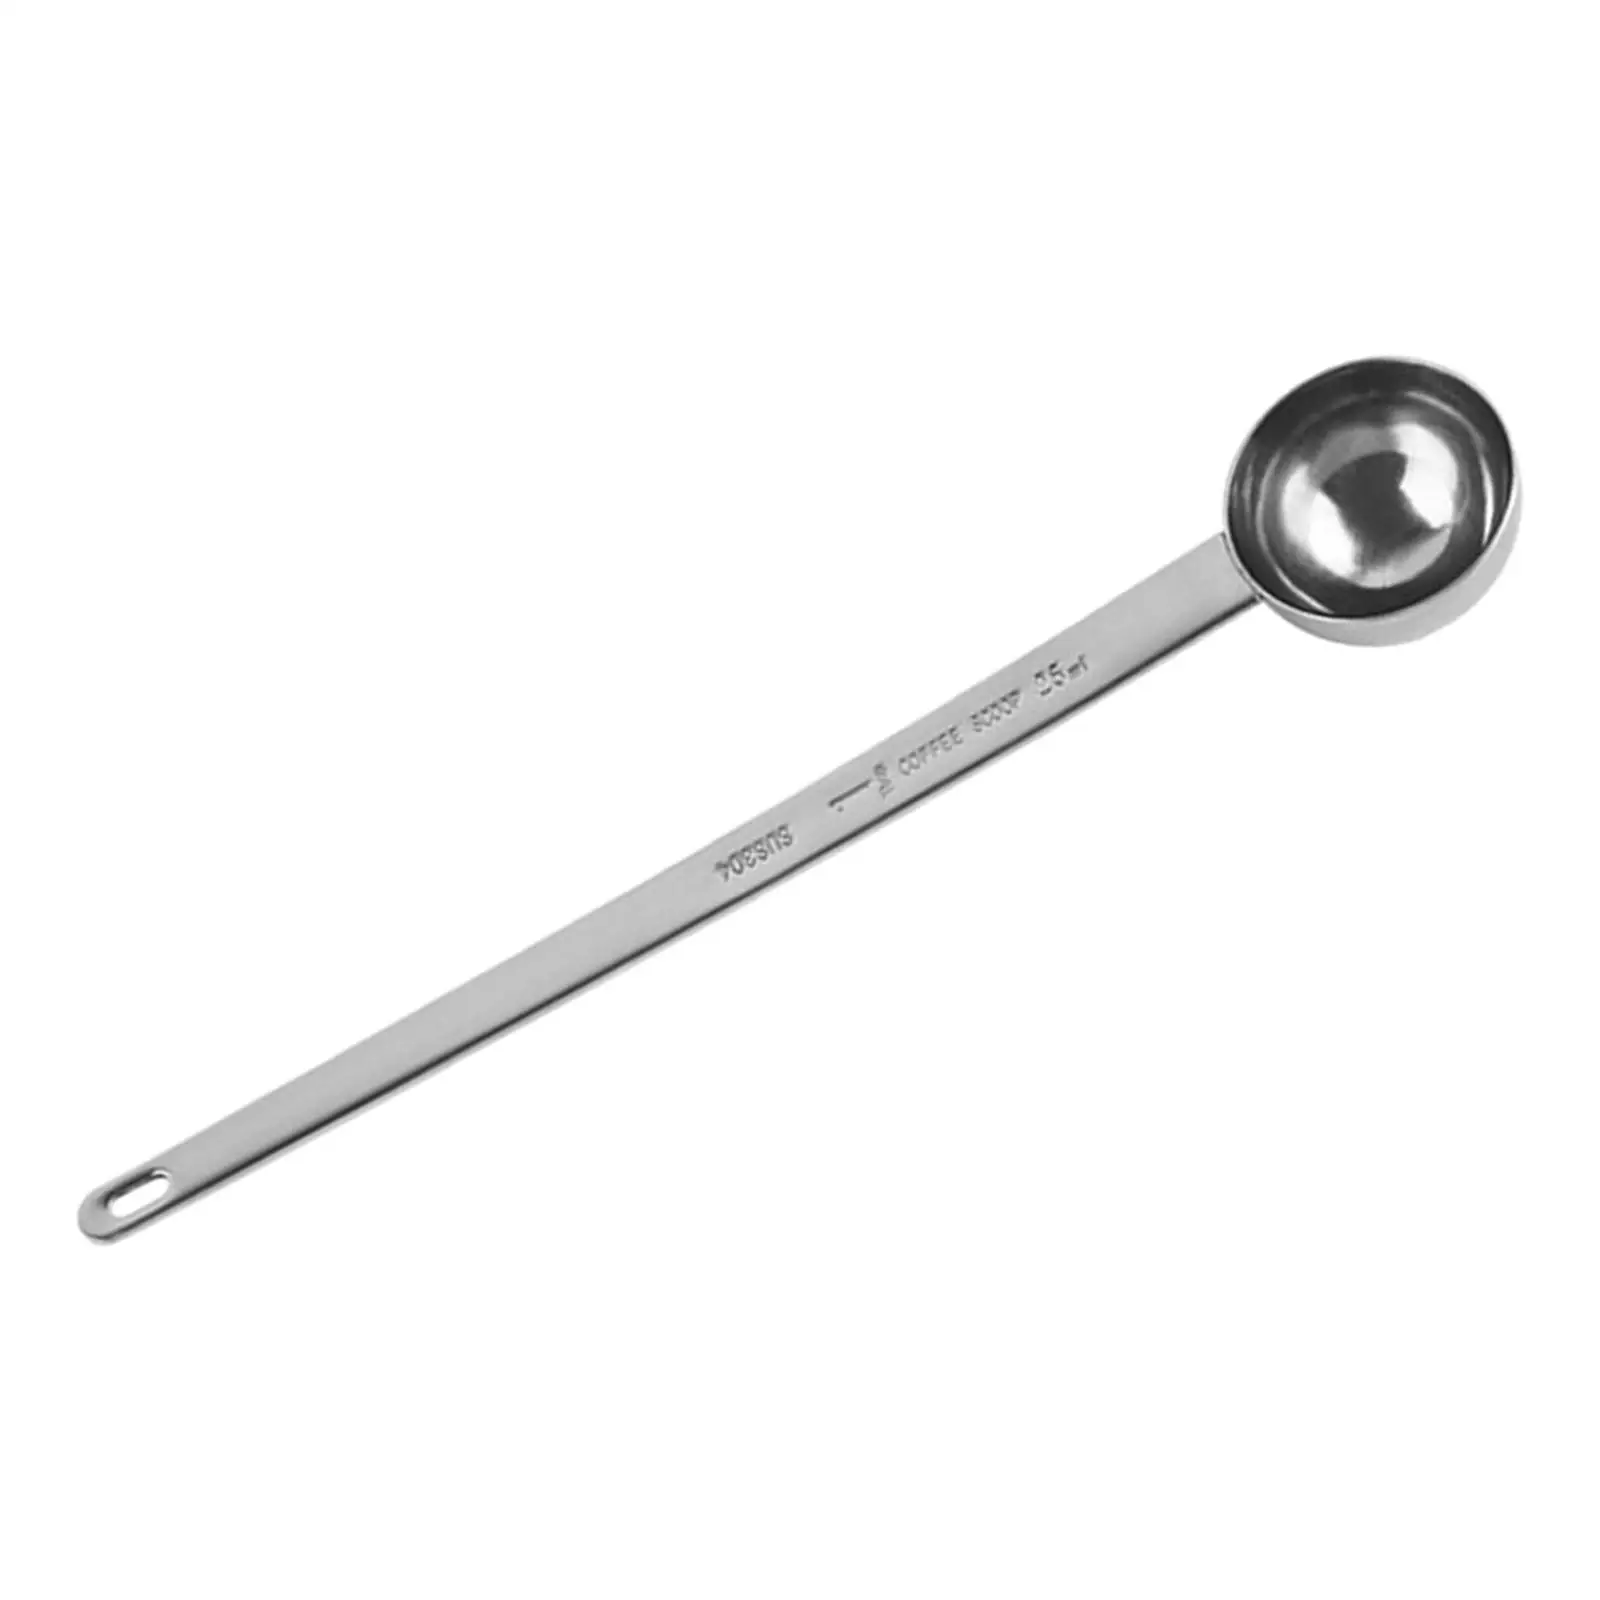 Coffee Spoon Long Handle Stainless Steel with Graduated Teaspoon Tea Milk Measuring for Baking and Cooking